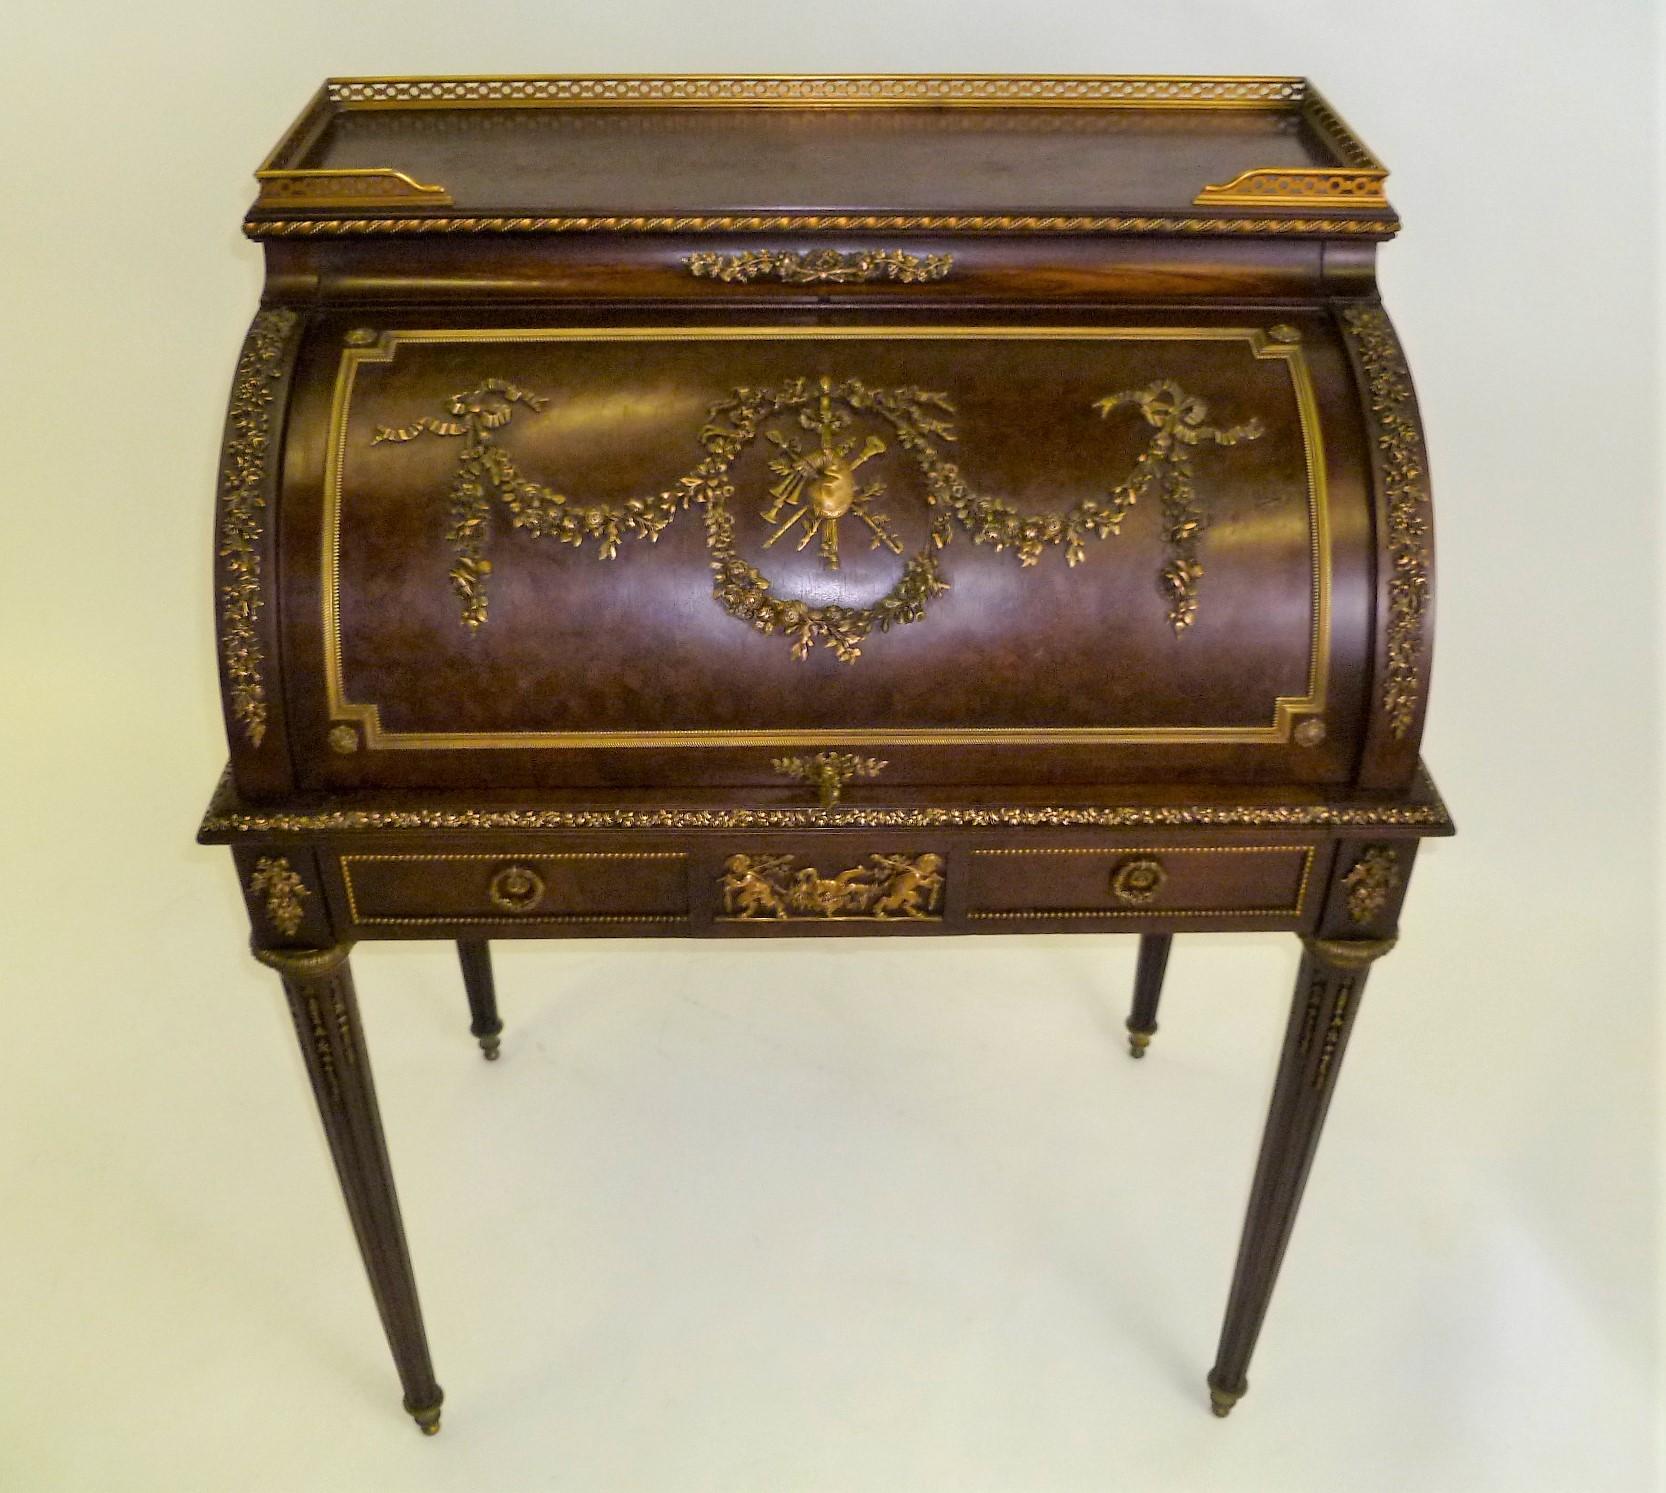 Exhibiting the sought after superior fineness of Francois Linke, this late 19th century petit Bureau a Cylindre or roll top desk is a splendid creation. Mahogany with a deep plum color and richly adorned with finely chased bronze mounts typical of